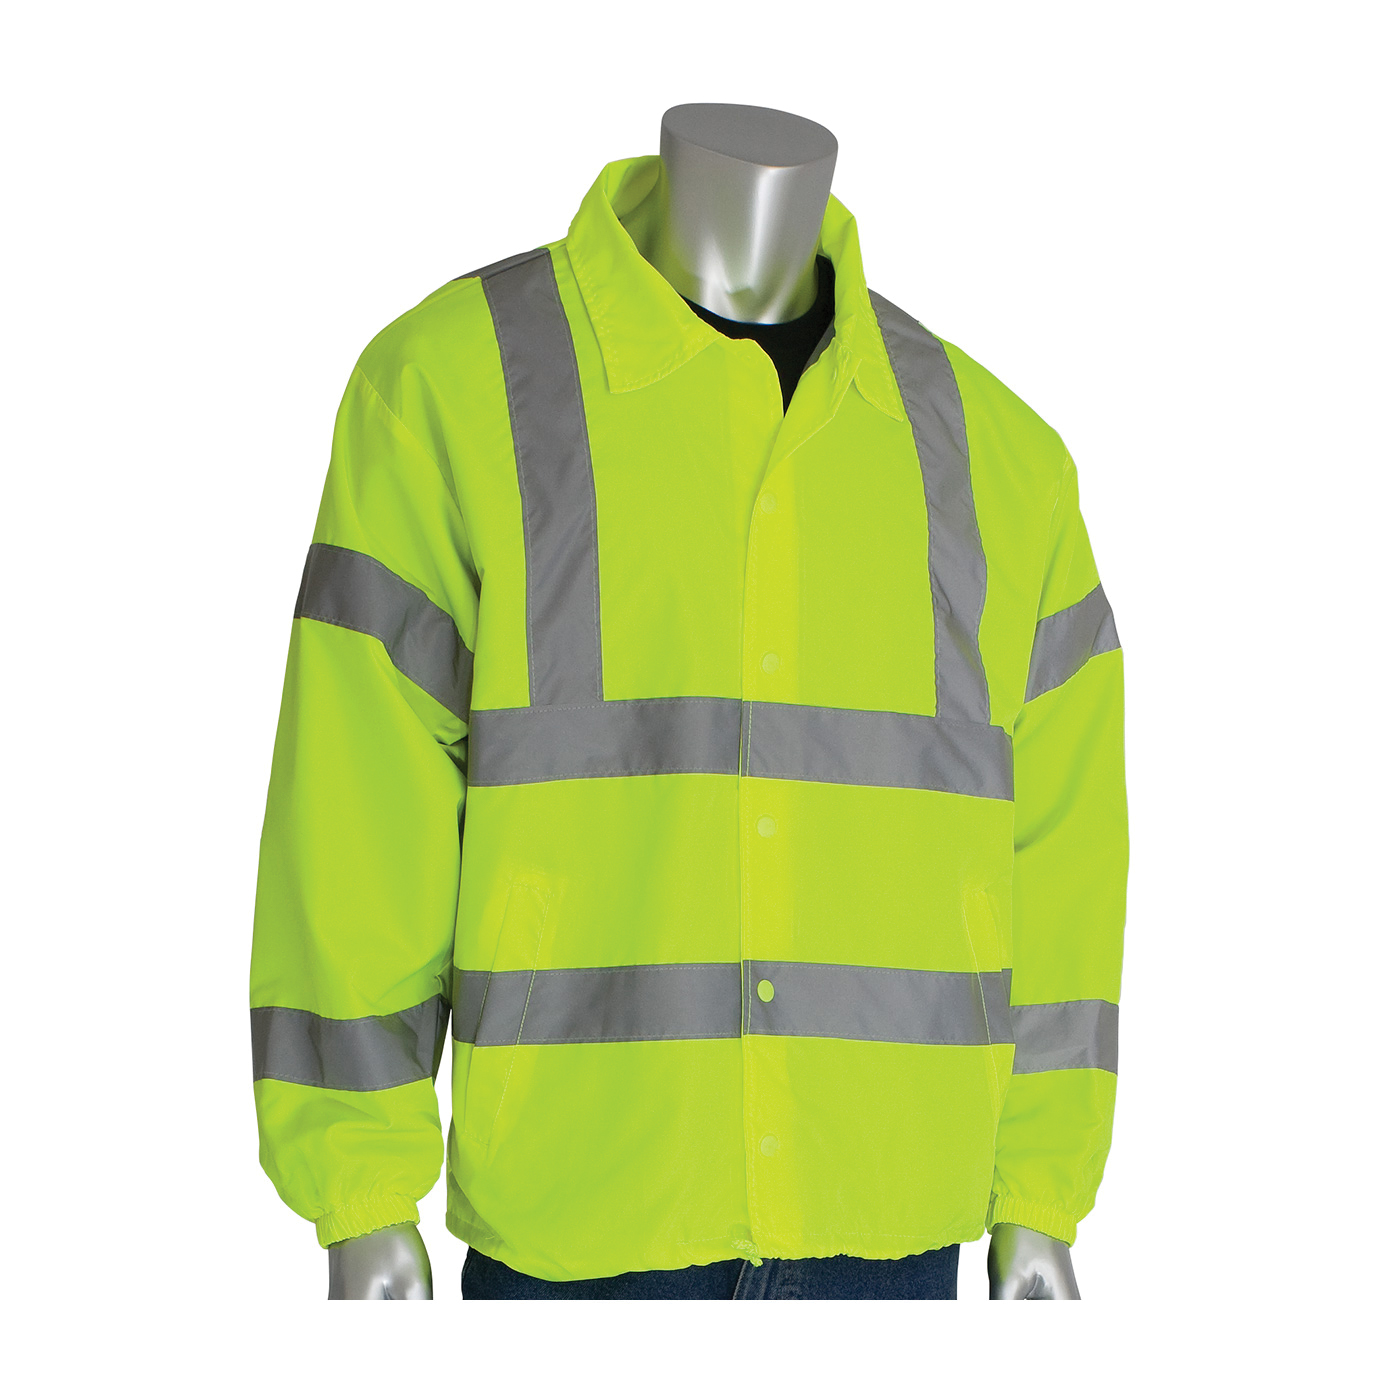 PIP® 333-WBLY-LG Classic Wind Breaker Jacket, Hi-Viz Lime Yellow, Polyester, 51.2 in Chest, Specifications Met: ANSI 107 Class 3 Type R